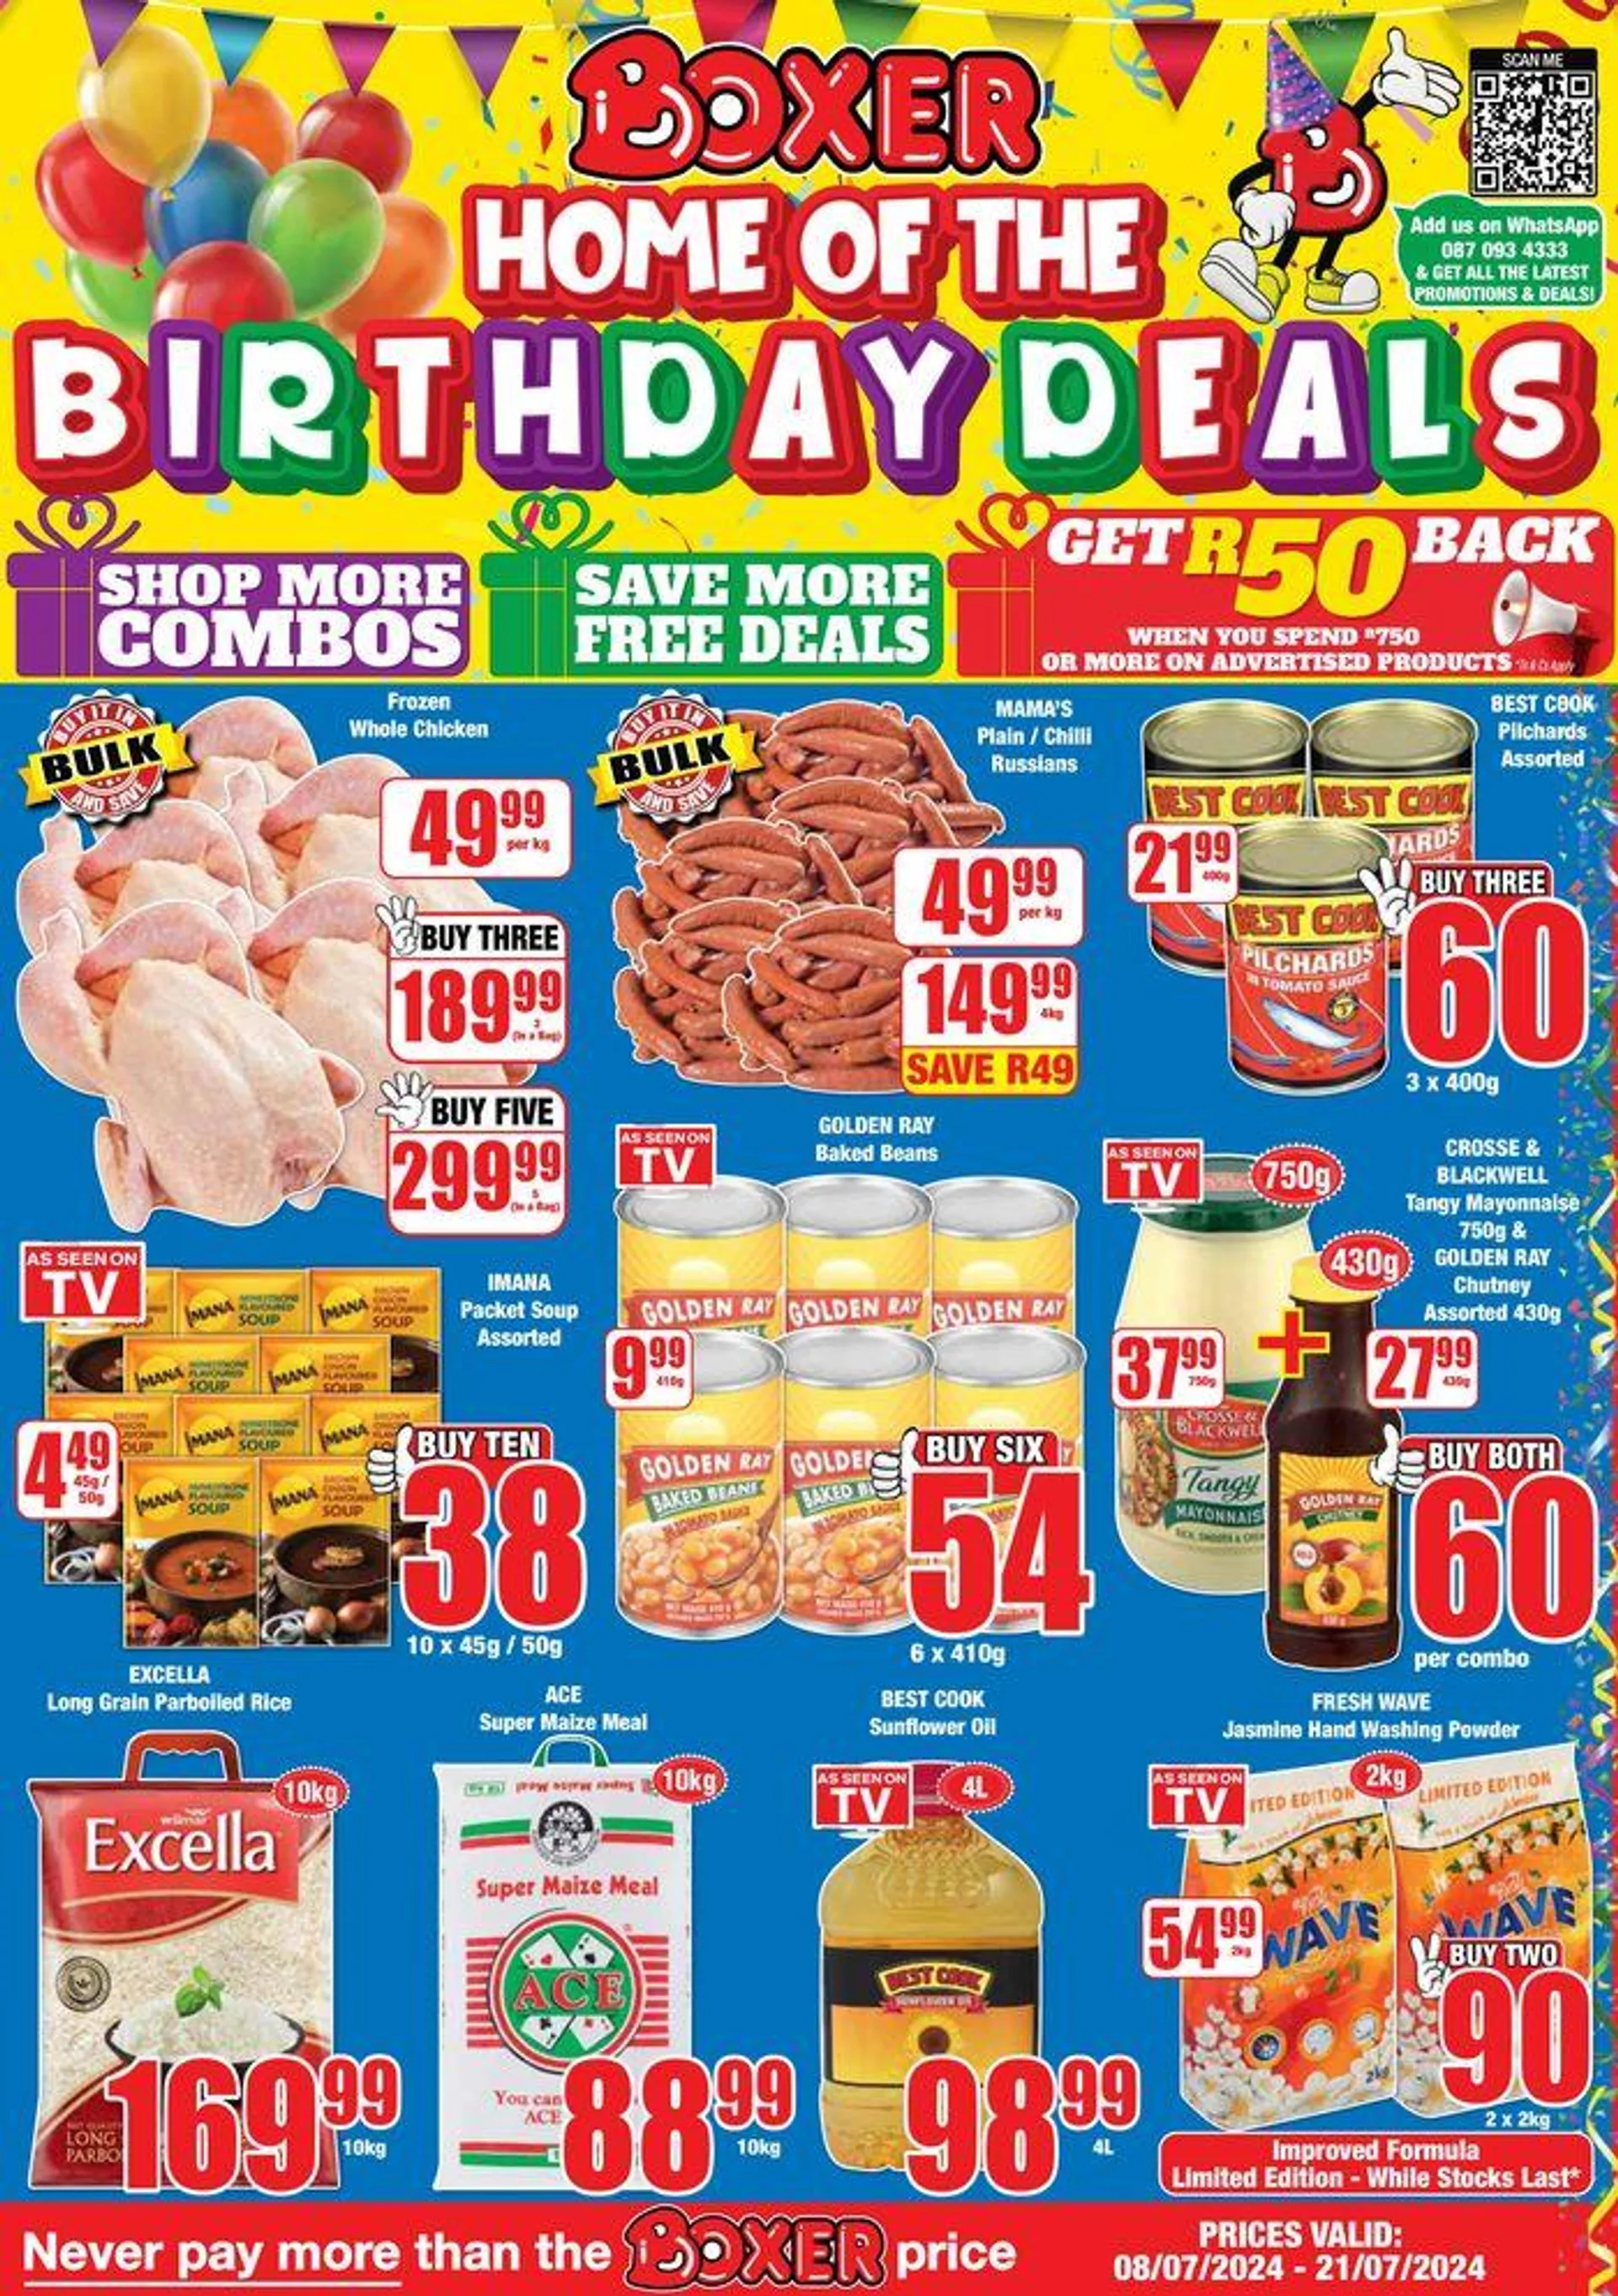 HOME OF THE BIRTHDAY DEAL - 1